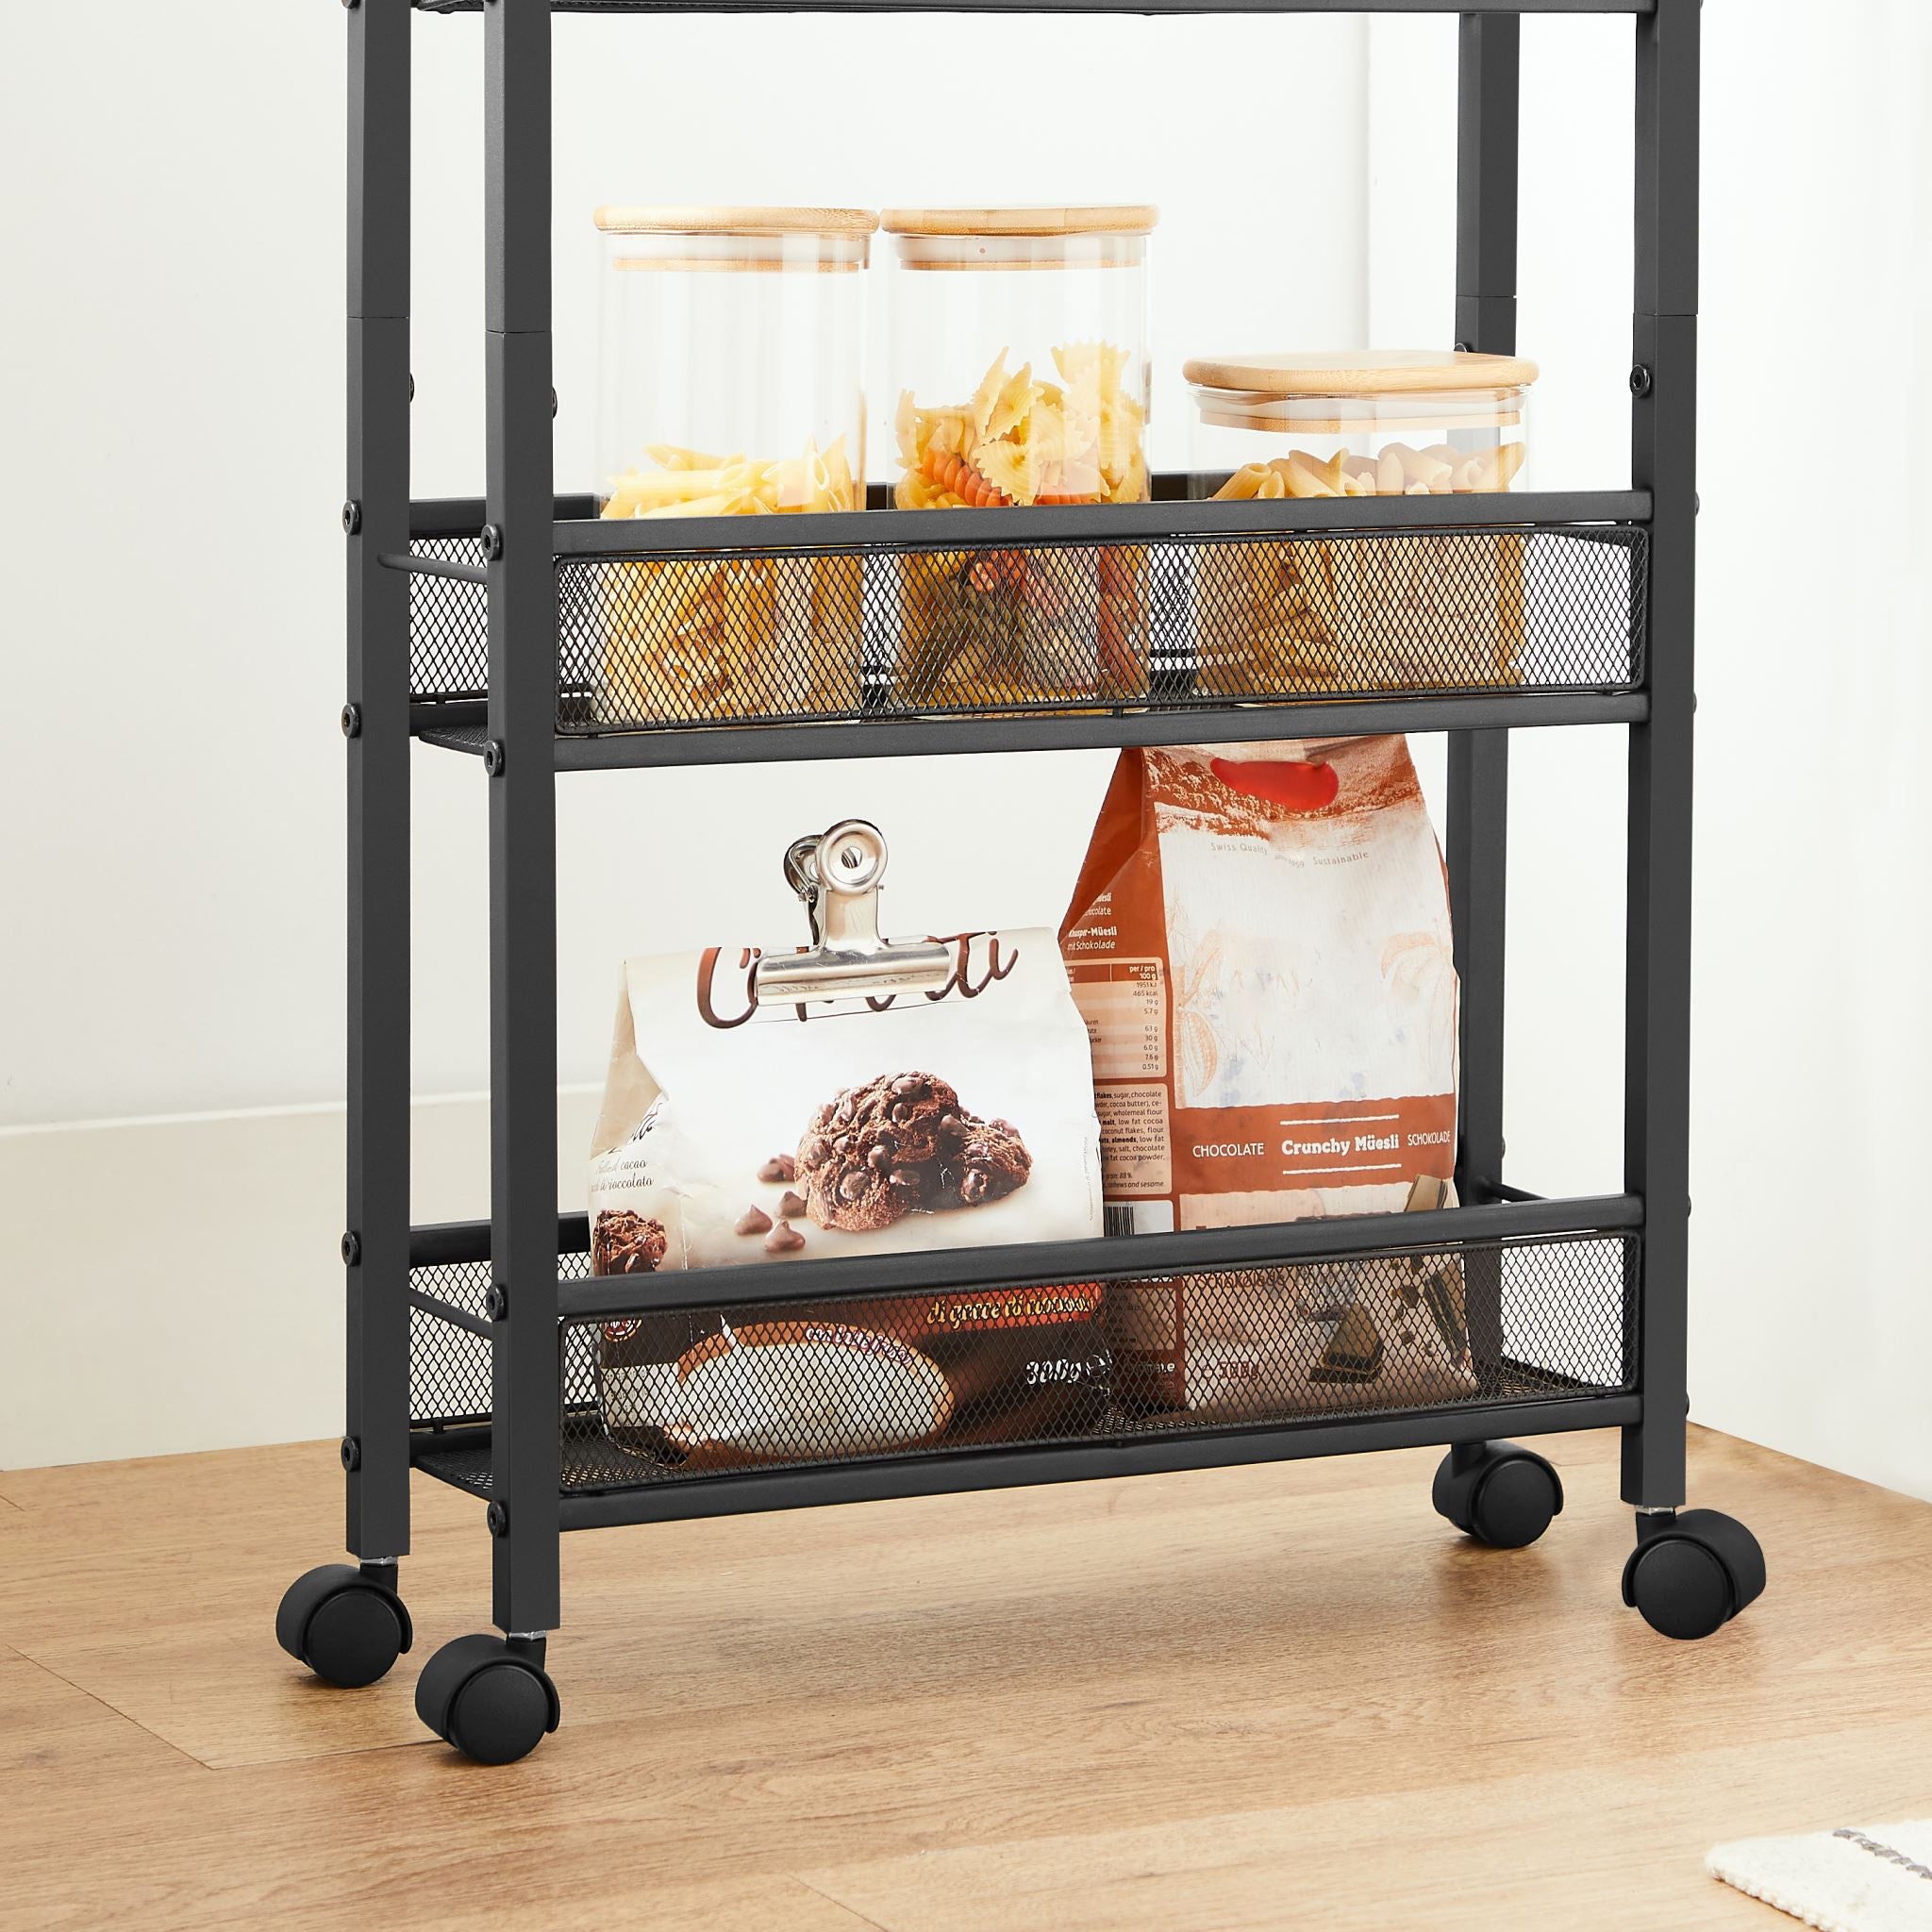 VASAGLE 3 Tiers Utility Rolling Cart Kitchen Trolley